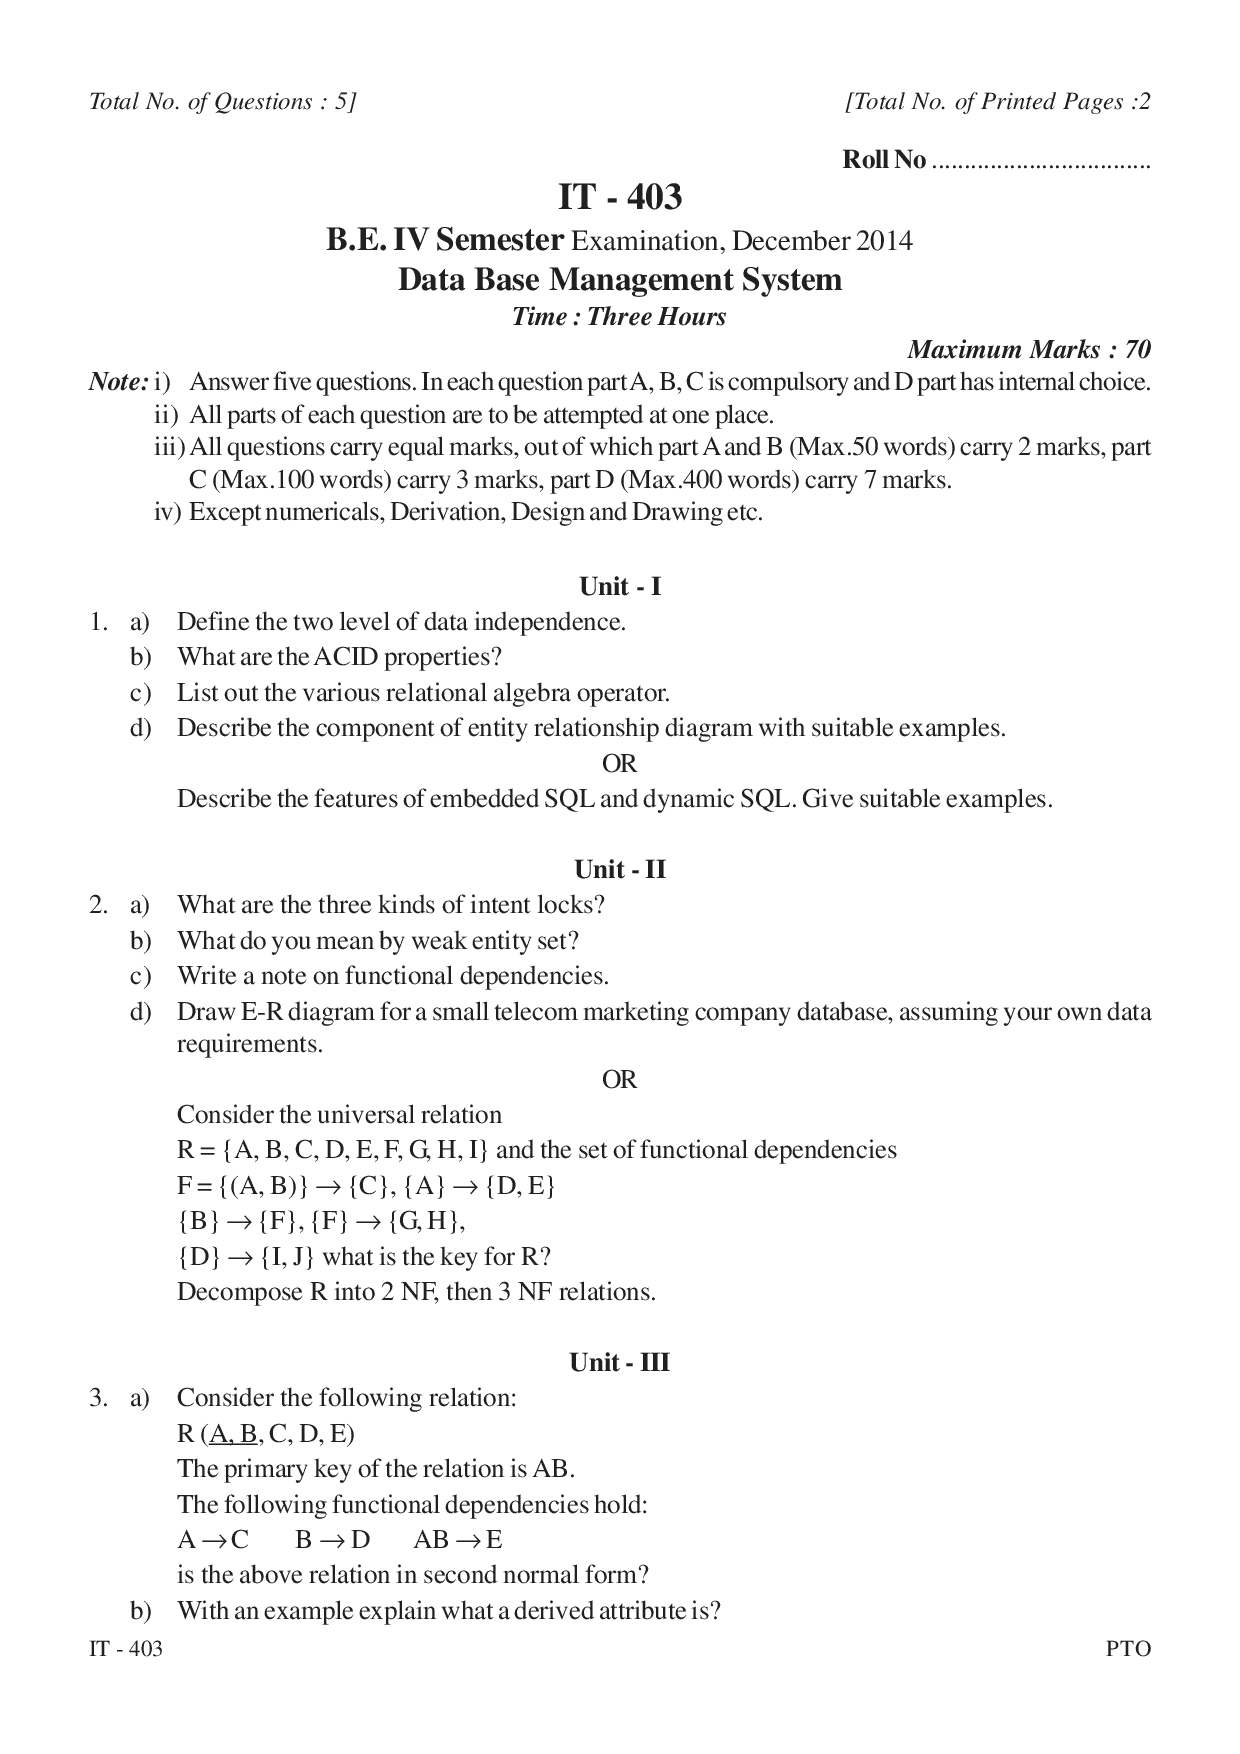 Question Type Paper Pattern For The Exam - Docsity inside Er Diagram Exam Questions